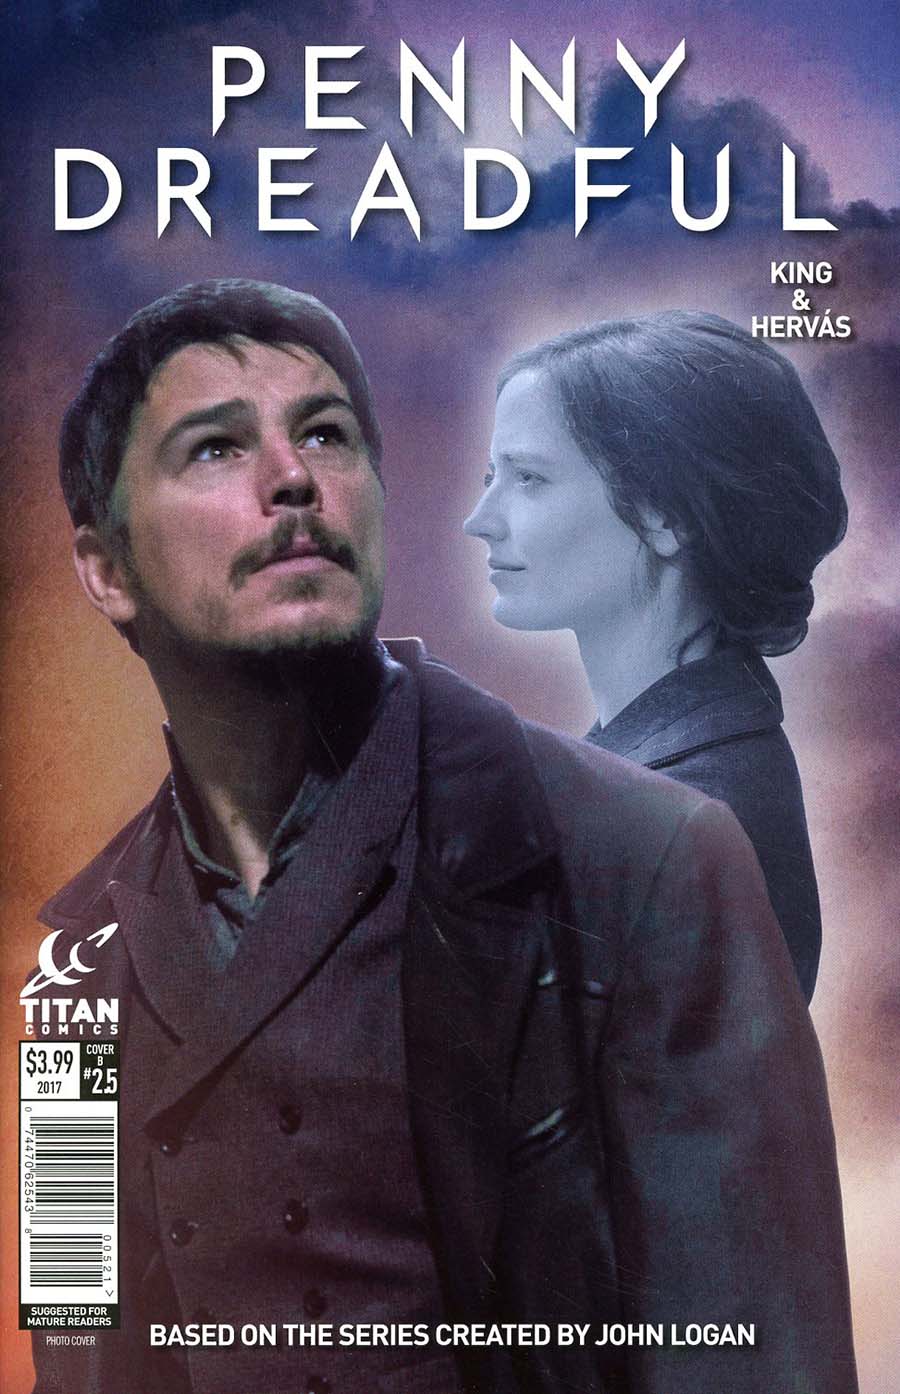 Penny Dreadful Vol 2 #5 Cover B Variant Photo Cover